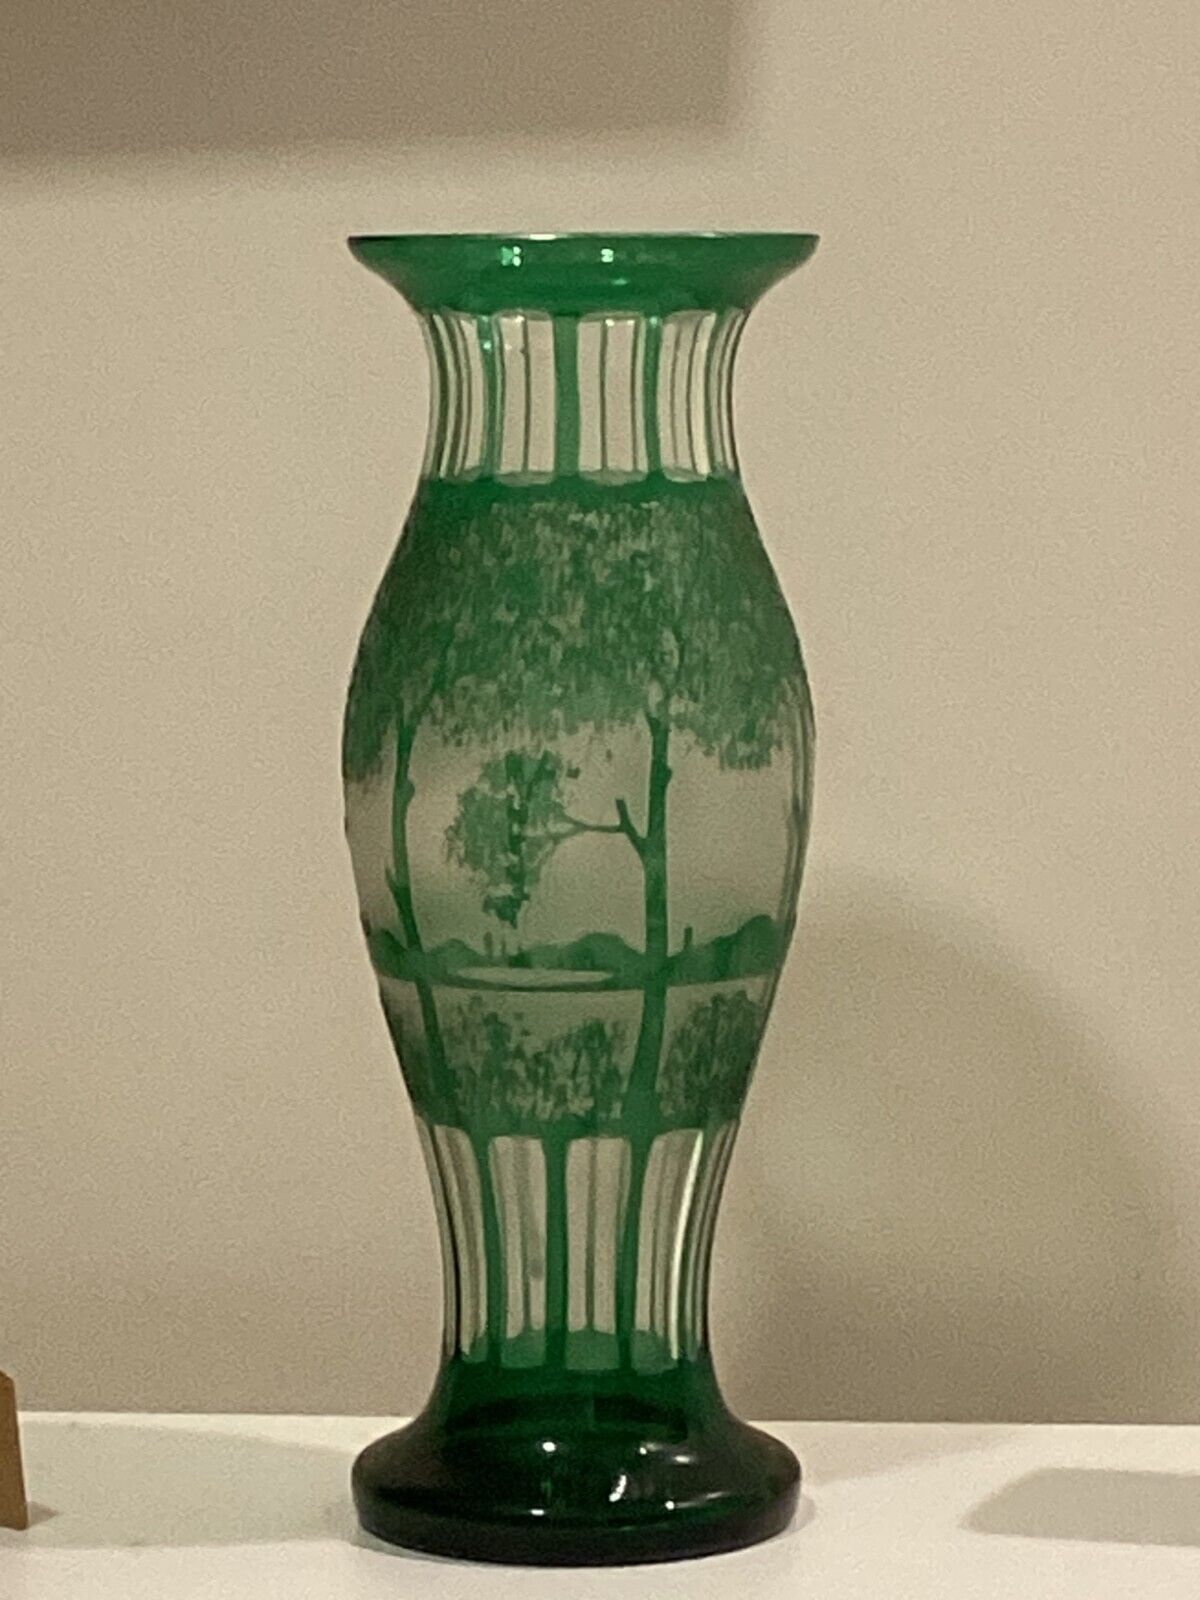 GREEN ART GLASS VASE. FACETED. CZECH. 14 IN HEIGHT. LANDSCAPE. CUT TO CLEAR.